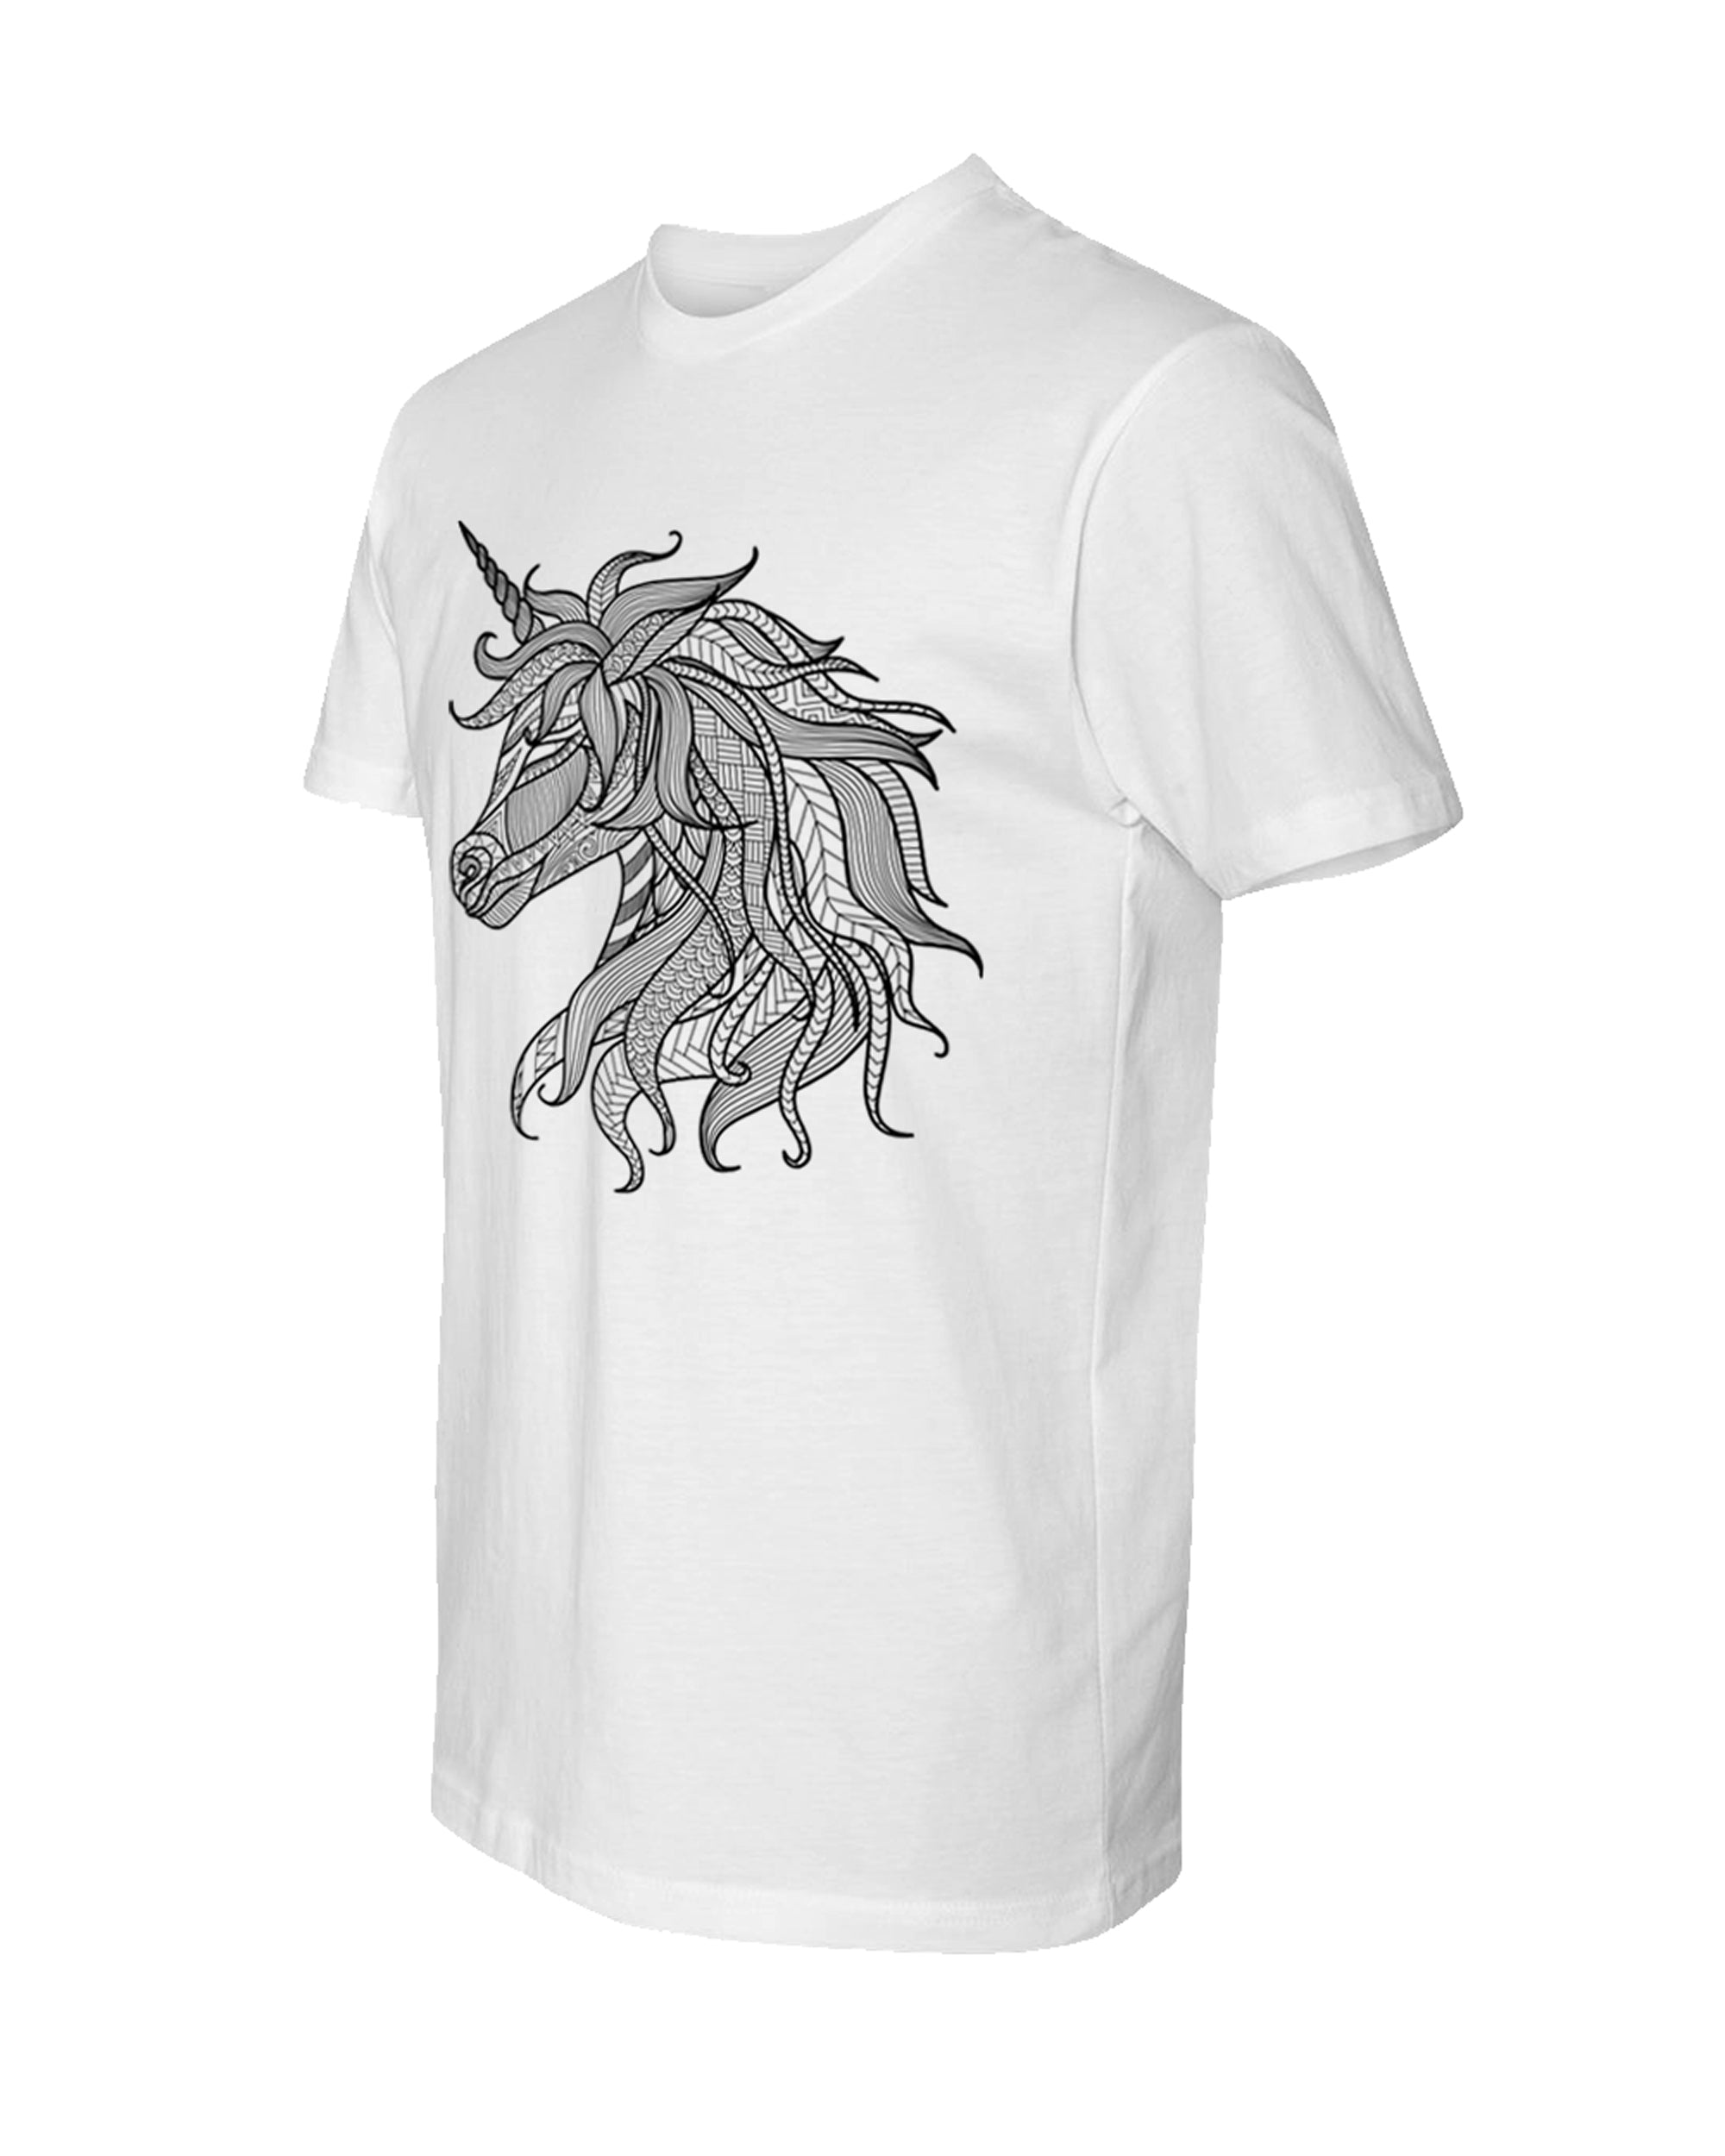 Men's Coloring Unicorn White T Shirt - Adorned By You